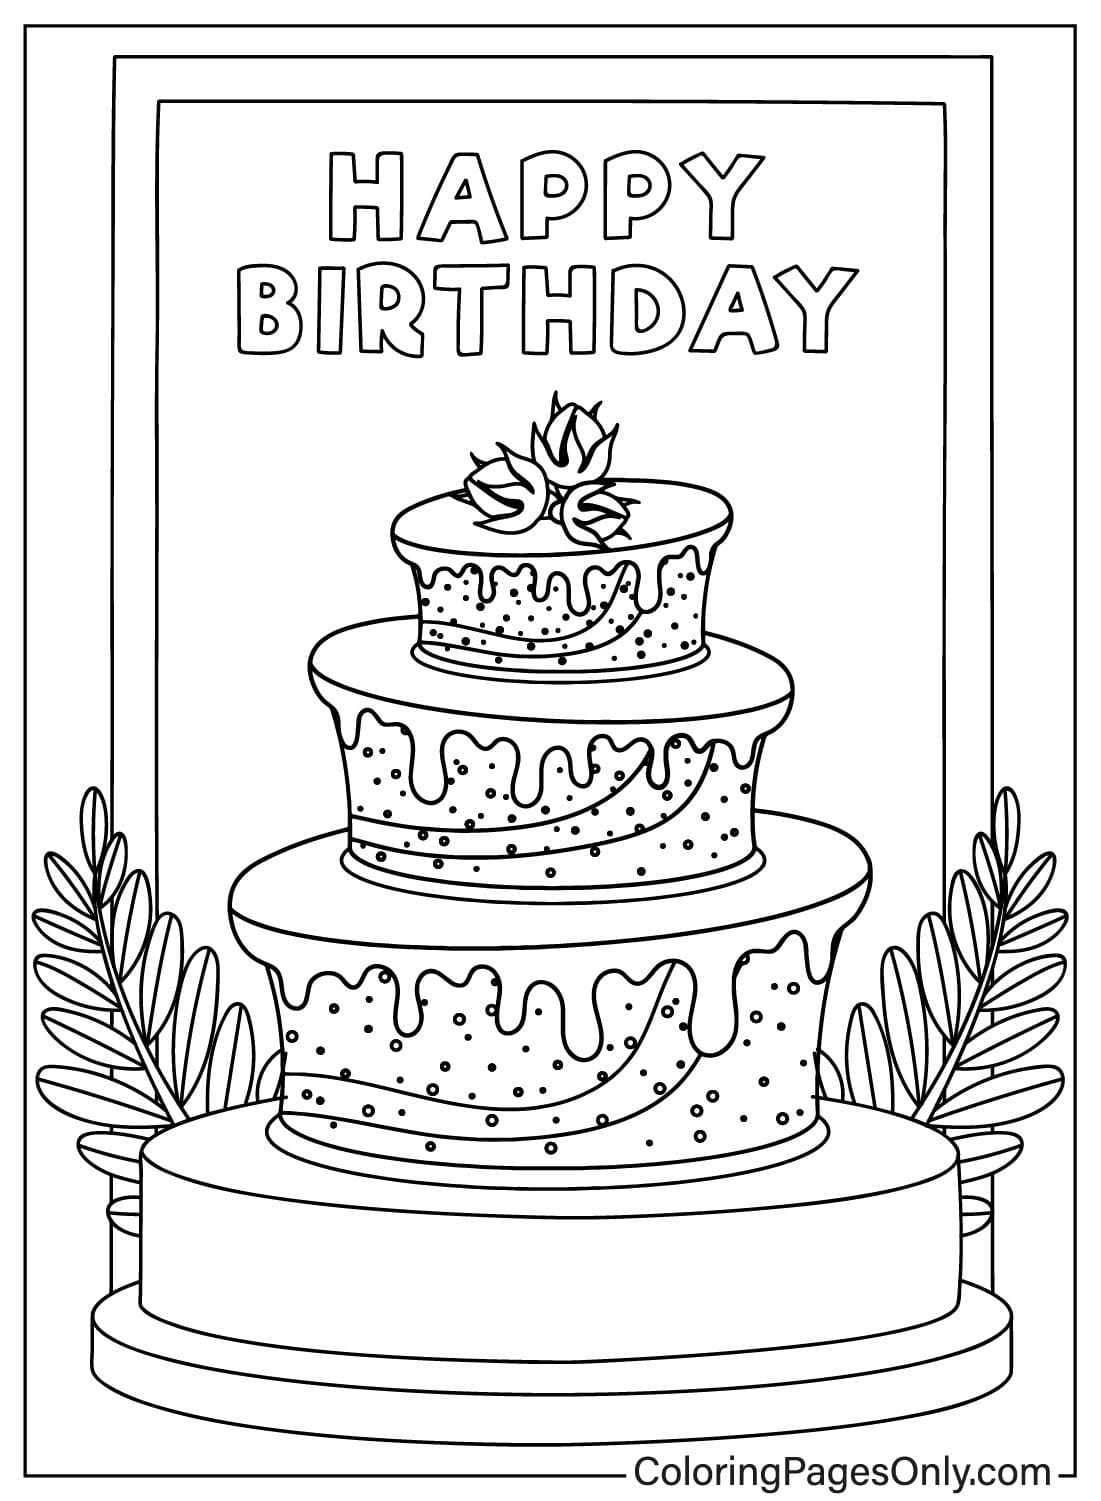 Birthday Cake Picture to Color from Birthday Cake